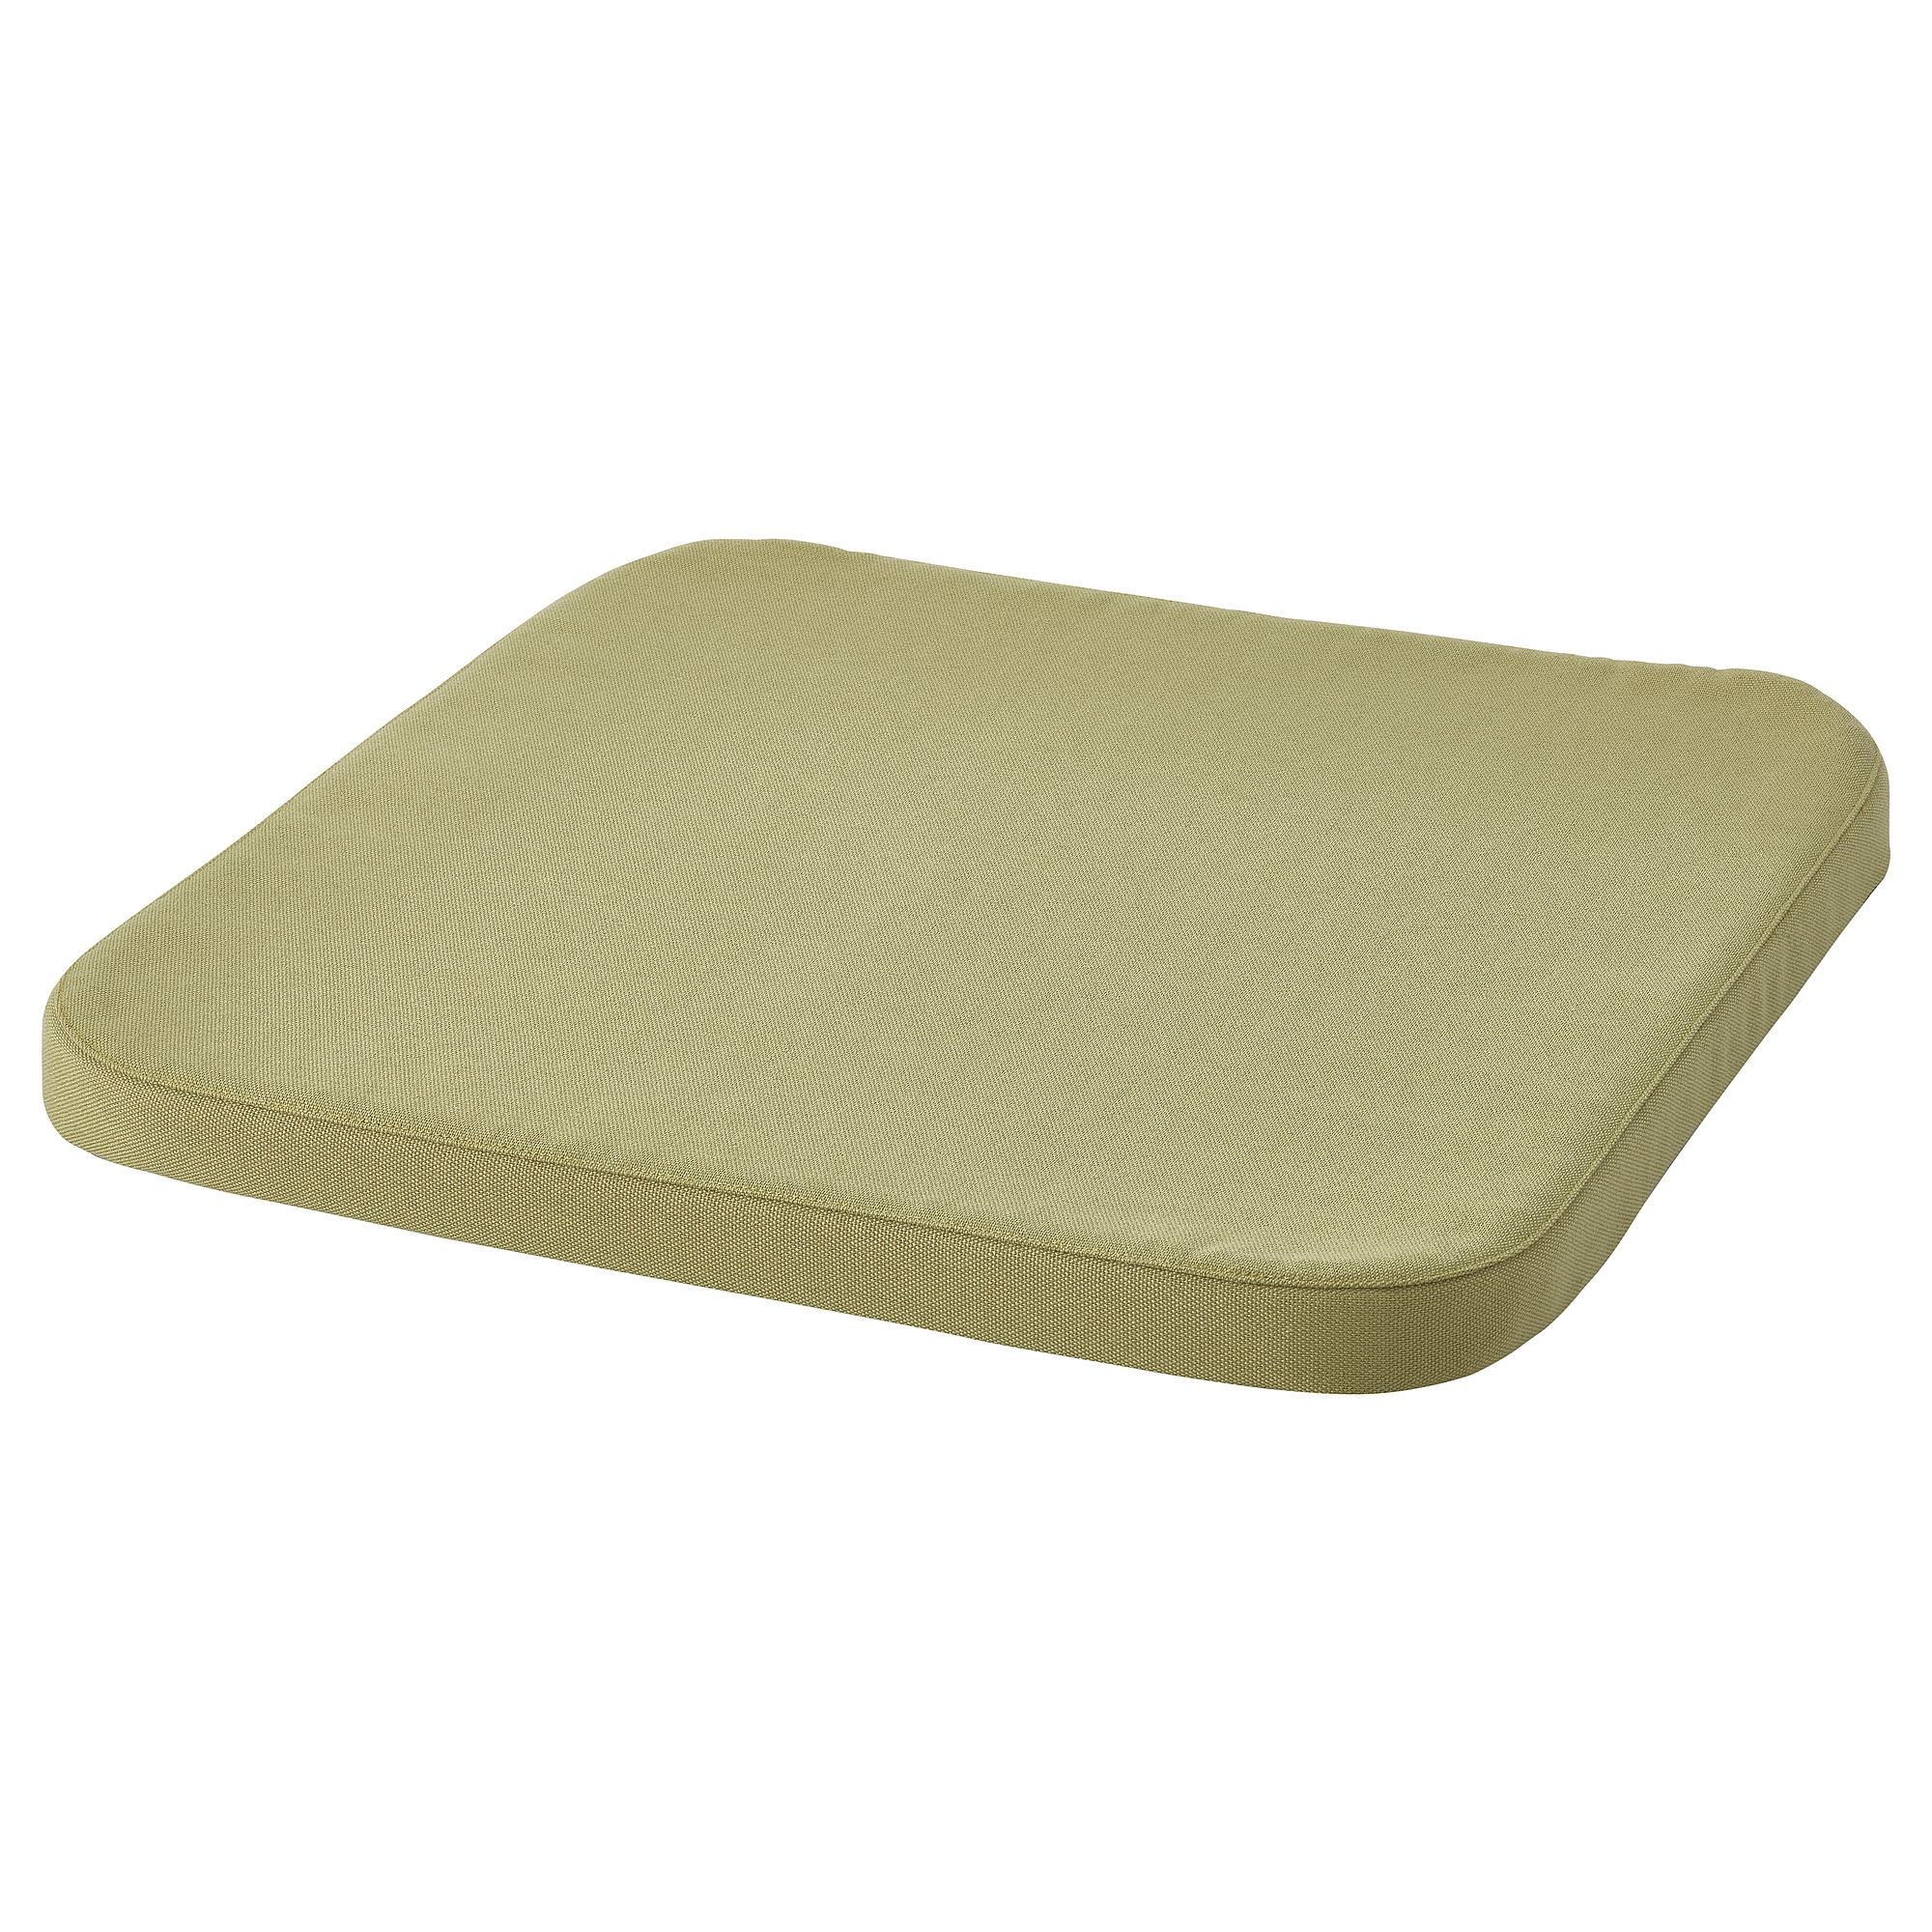 STAGGSTARR chair pad